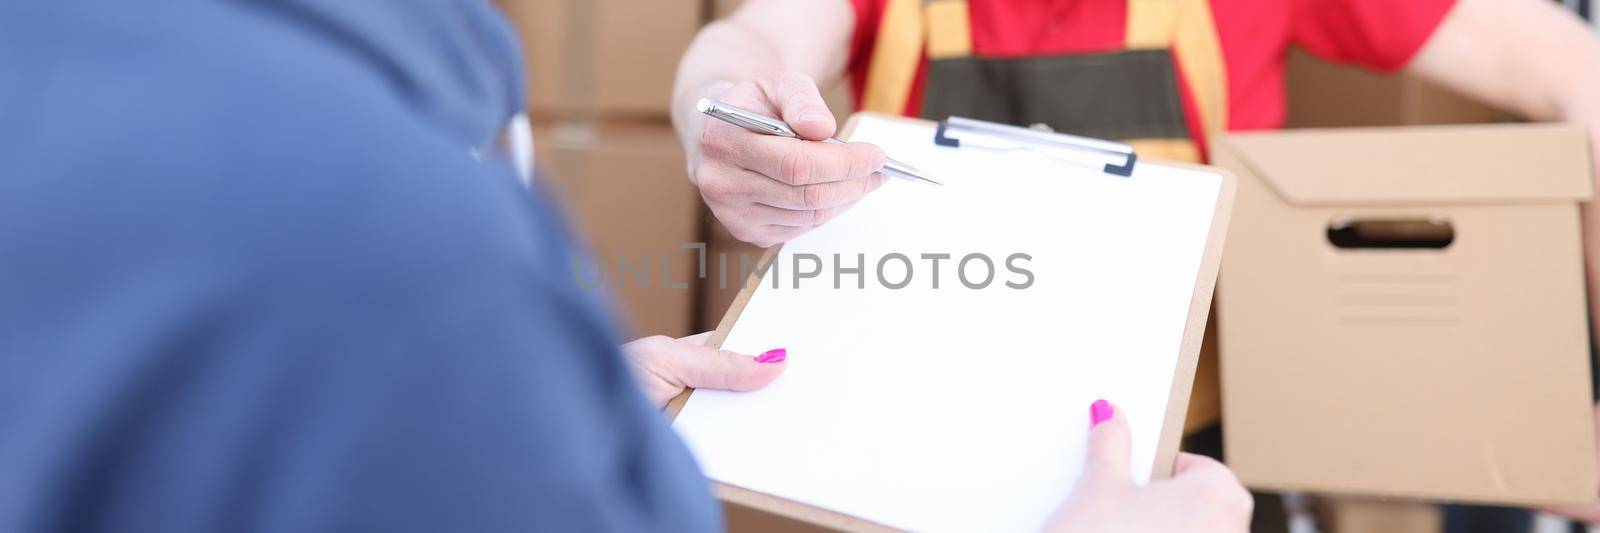 Courier holds parcel, woman signs document by kuprevich